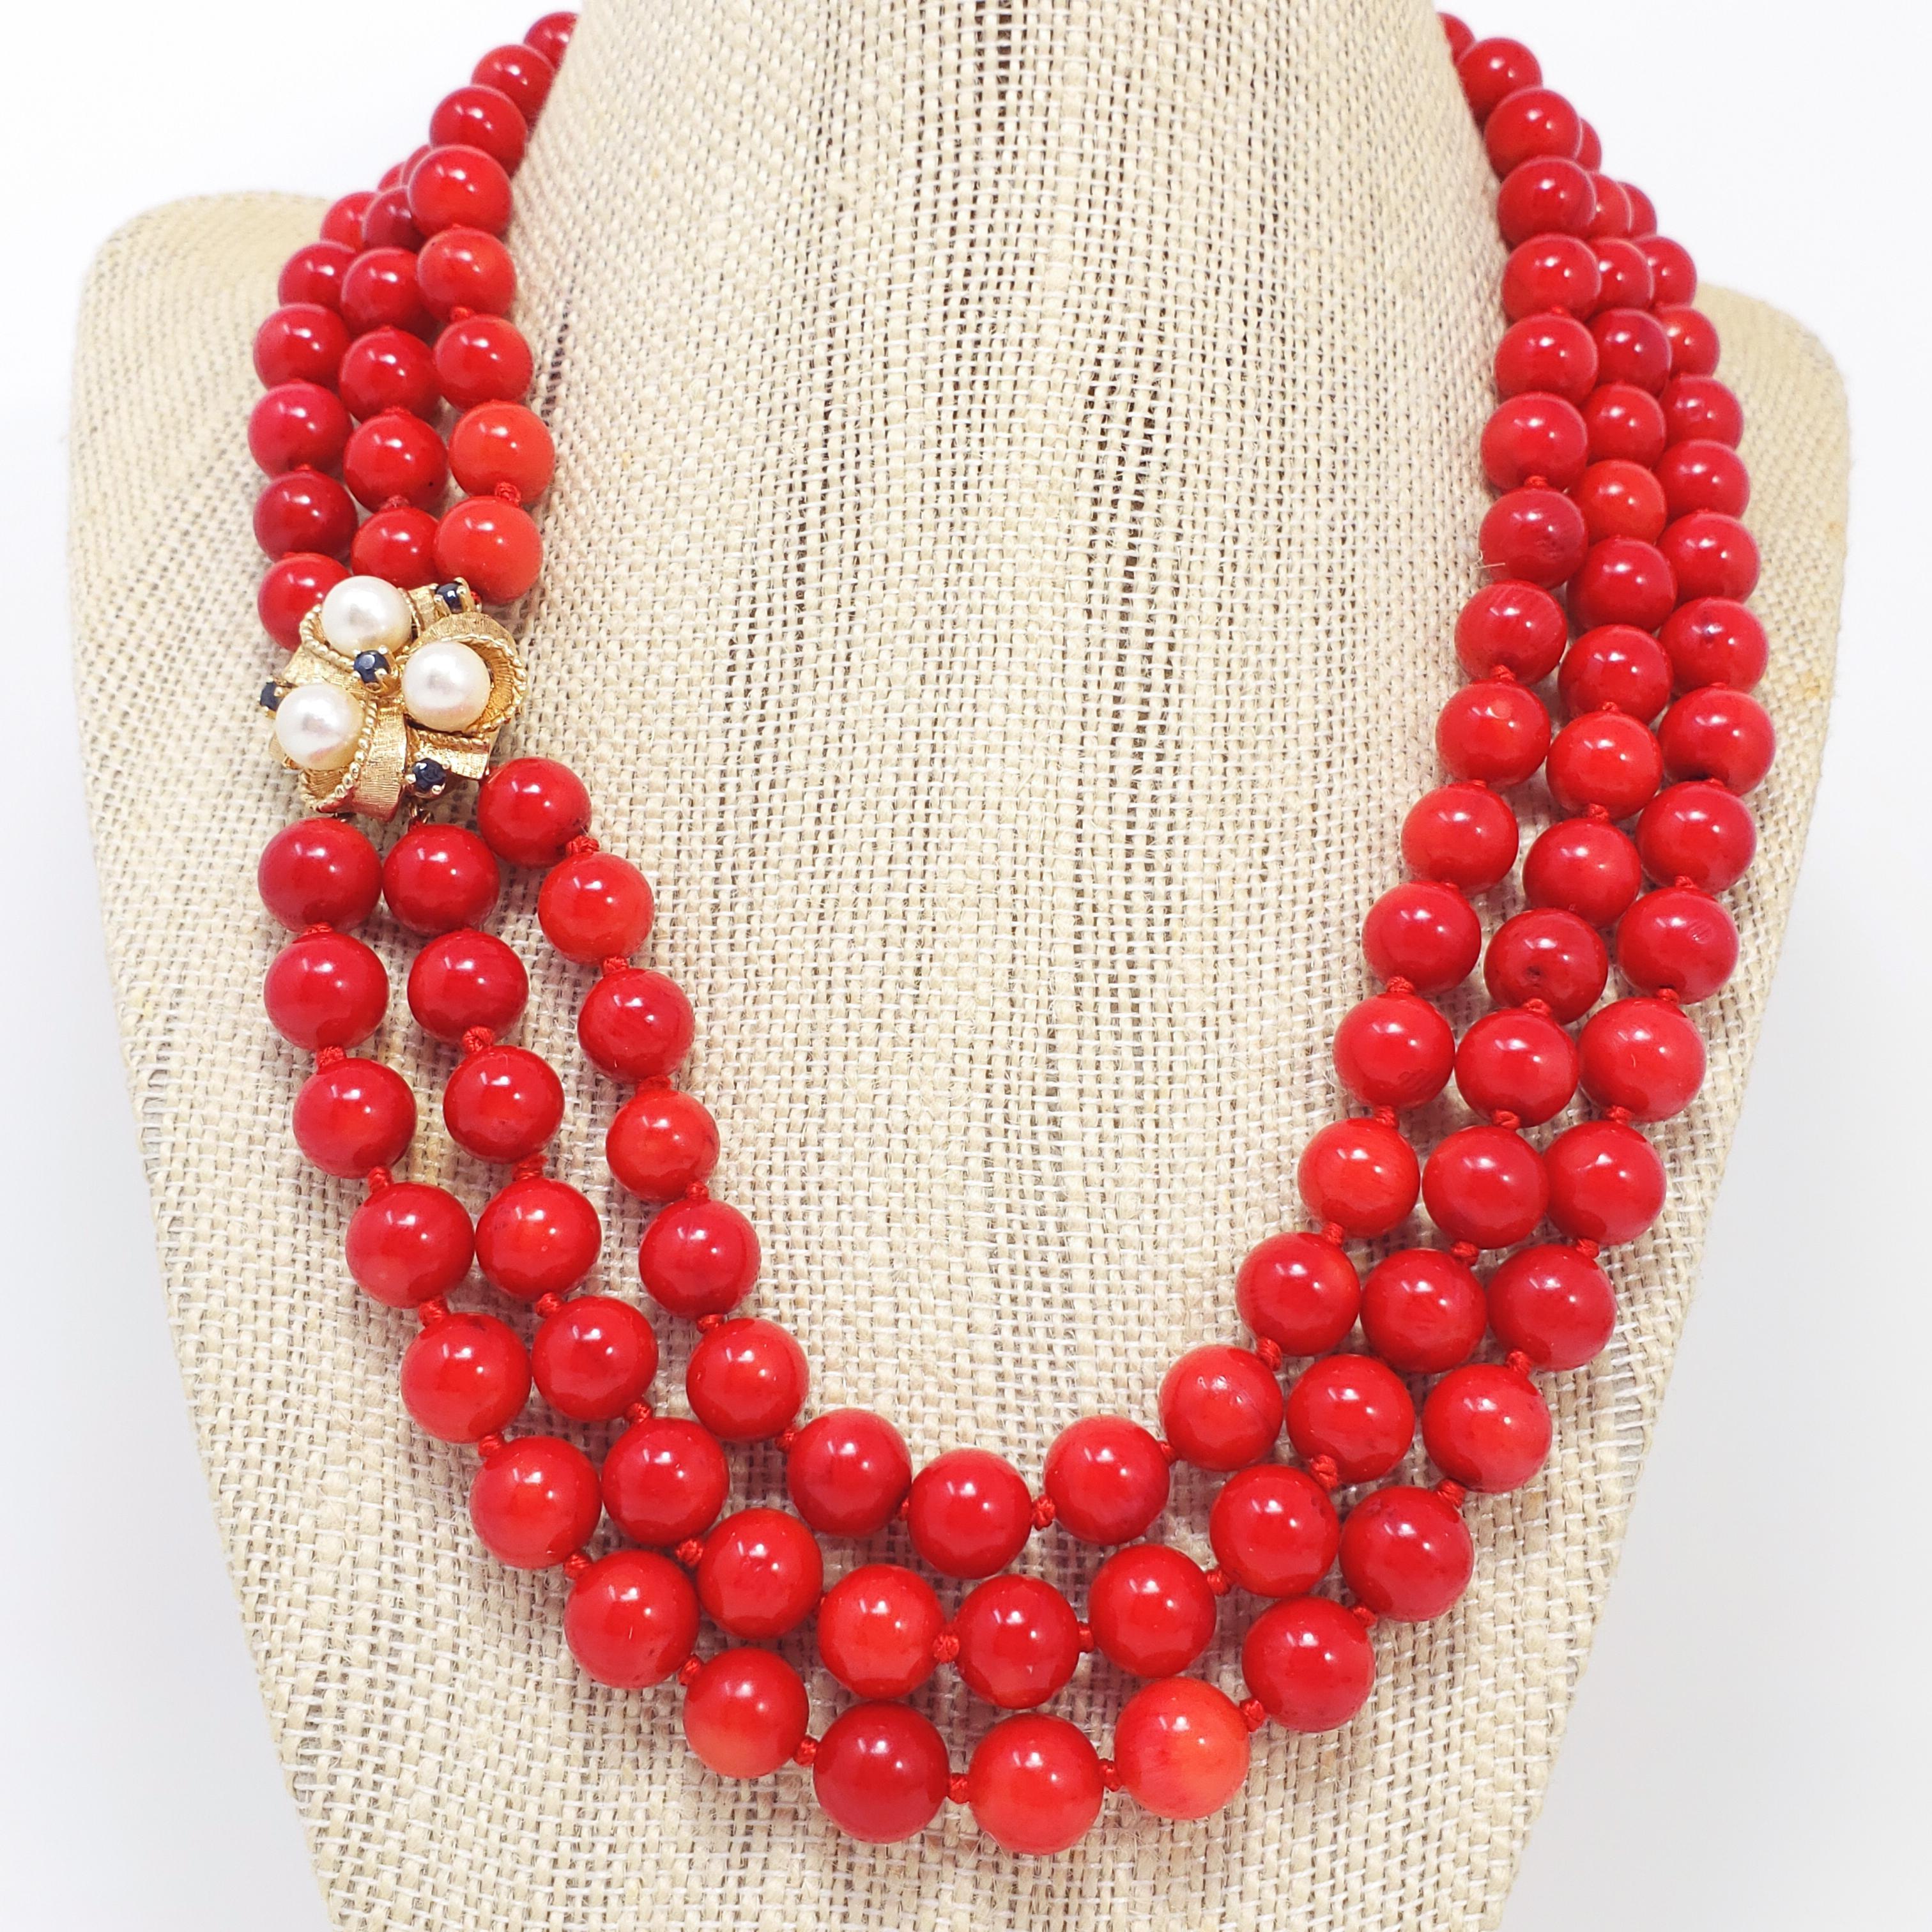 An exquisite necklace featuring three strands of 9mm genuine red,  Italian coral beads on a regal 14K gold box clap. The clasp features a bow motif and is decorated with three 6.5mm genuine pearls and four 2.3mm genuine, prong-set sapphires. A